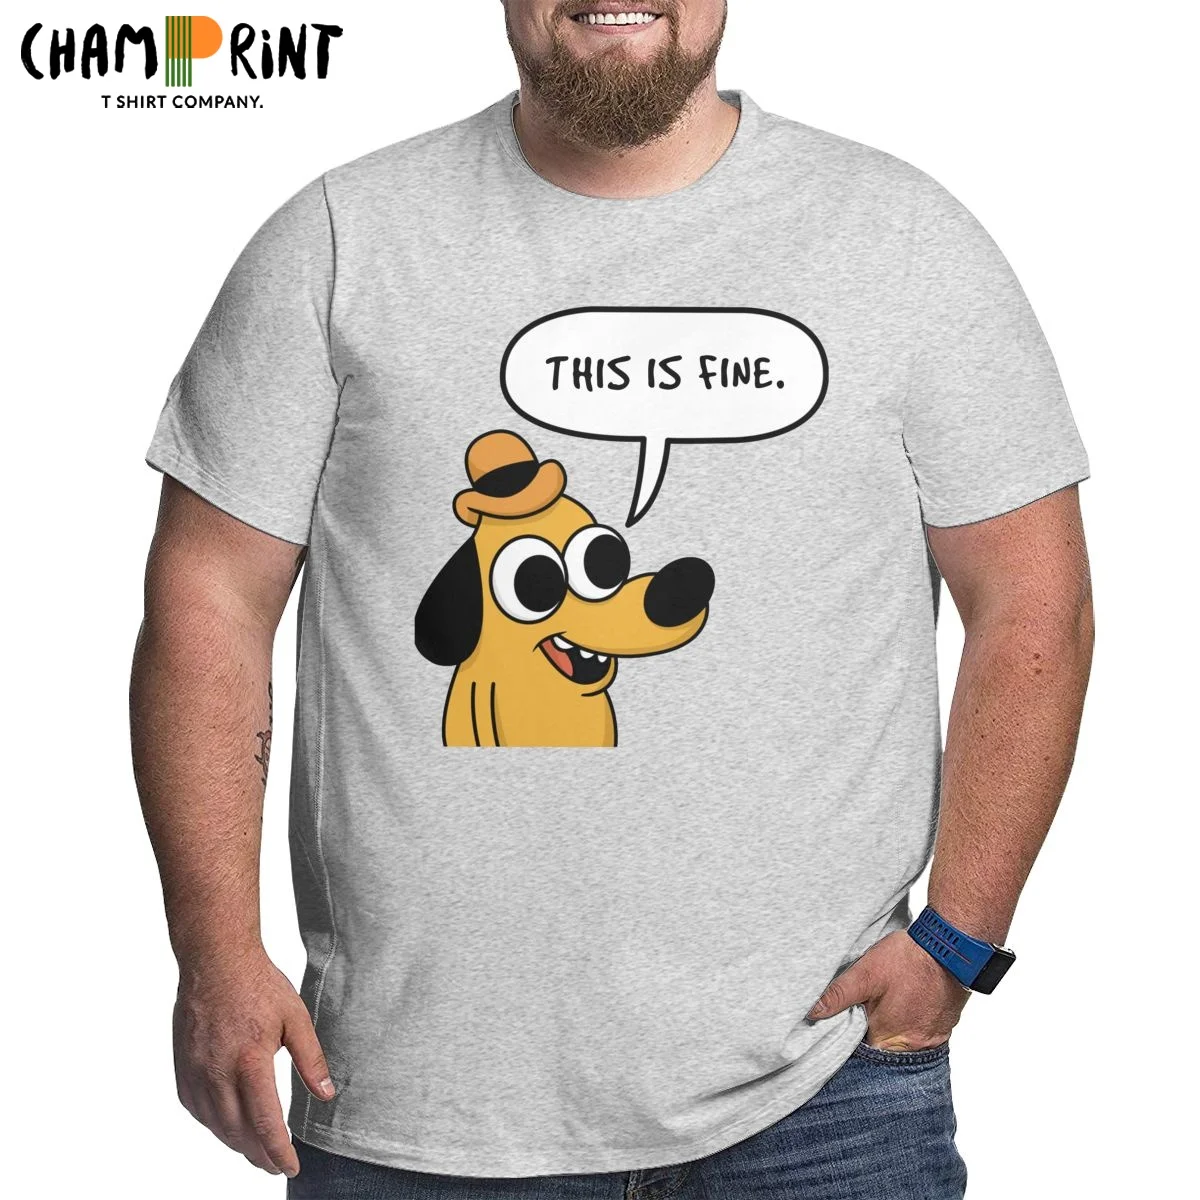 This Is Fine Meme T-Shirt for Men Crew Neck Cotton T Shirts Dog Short Sleeve Big Tall Tees Plus Size Big Size Large 4XL 5XL 6XL